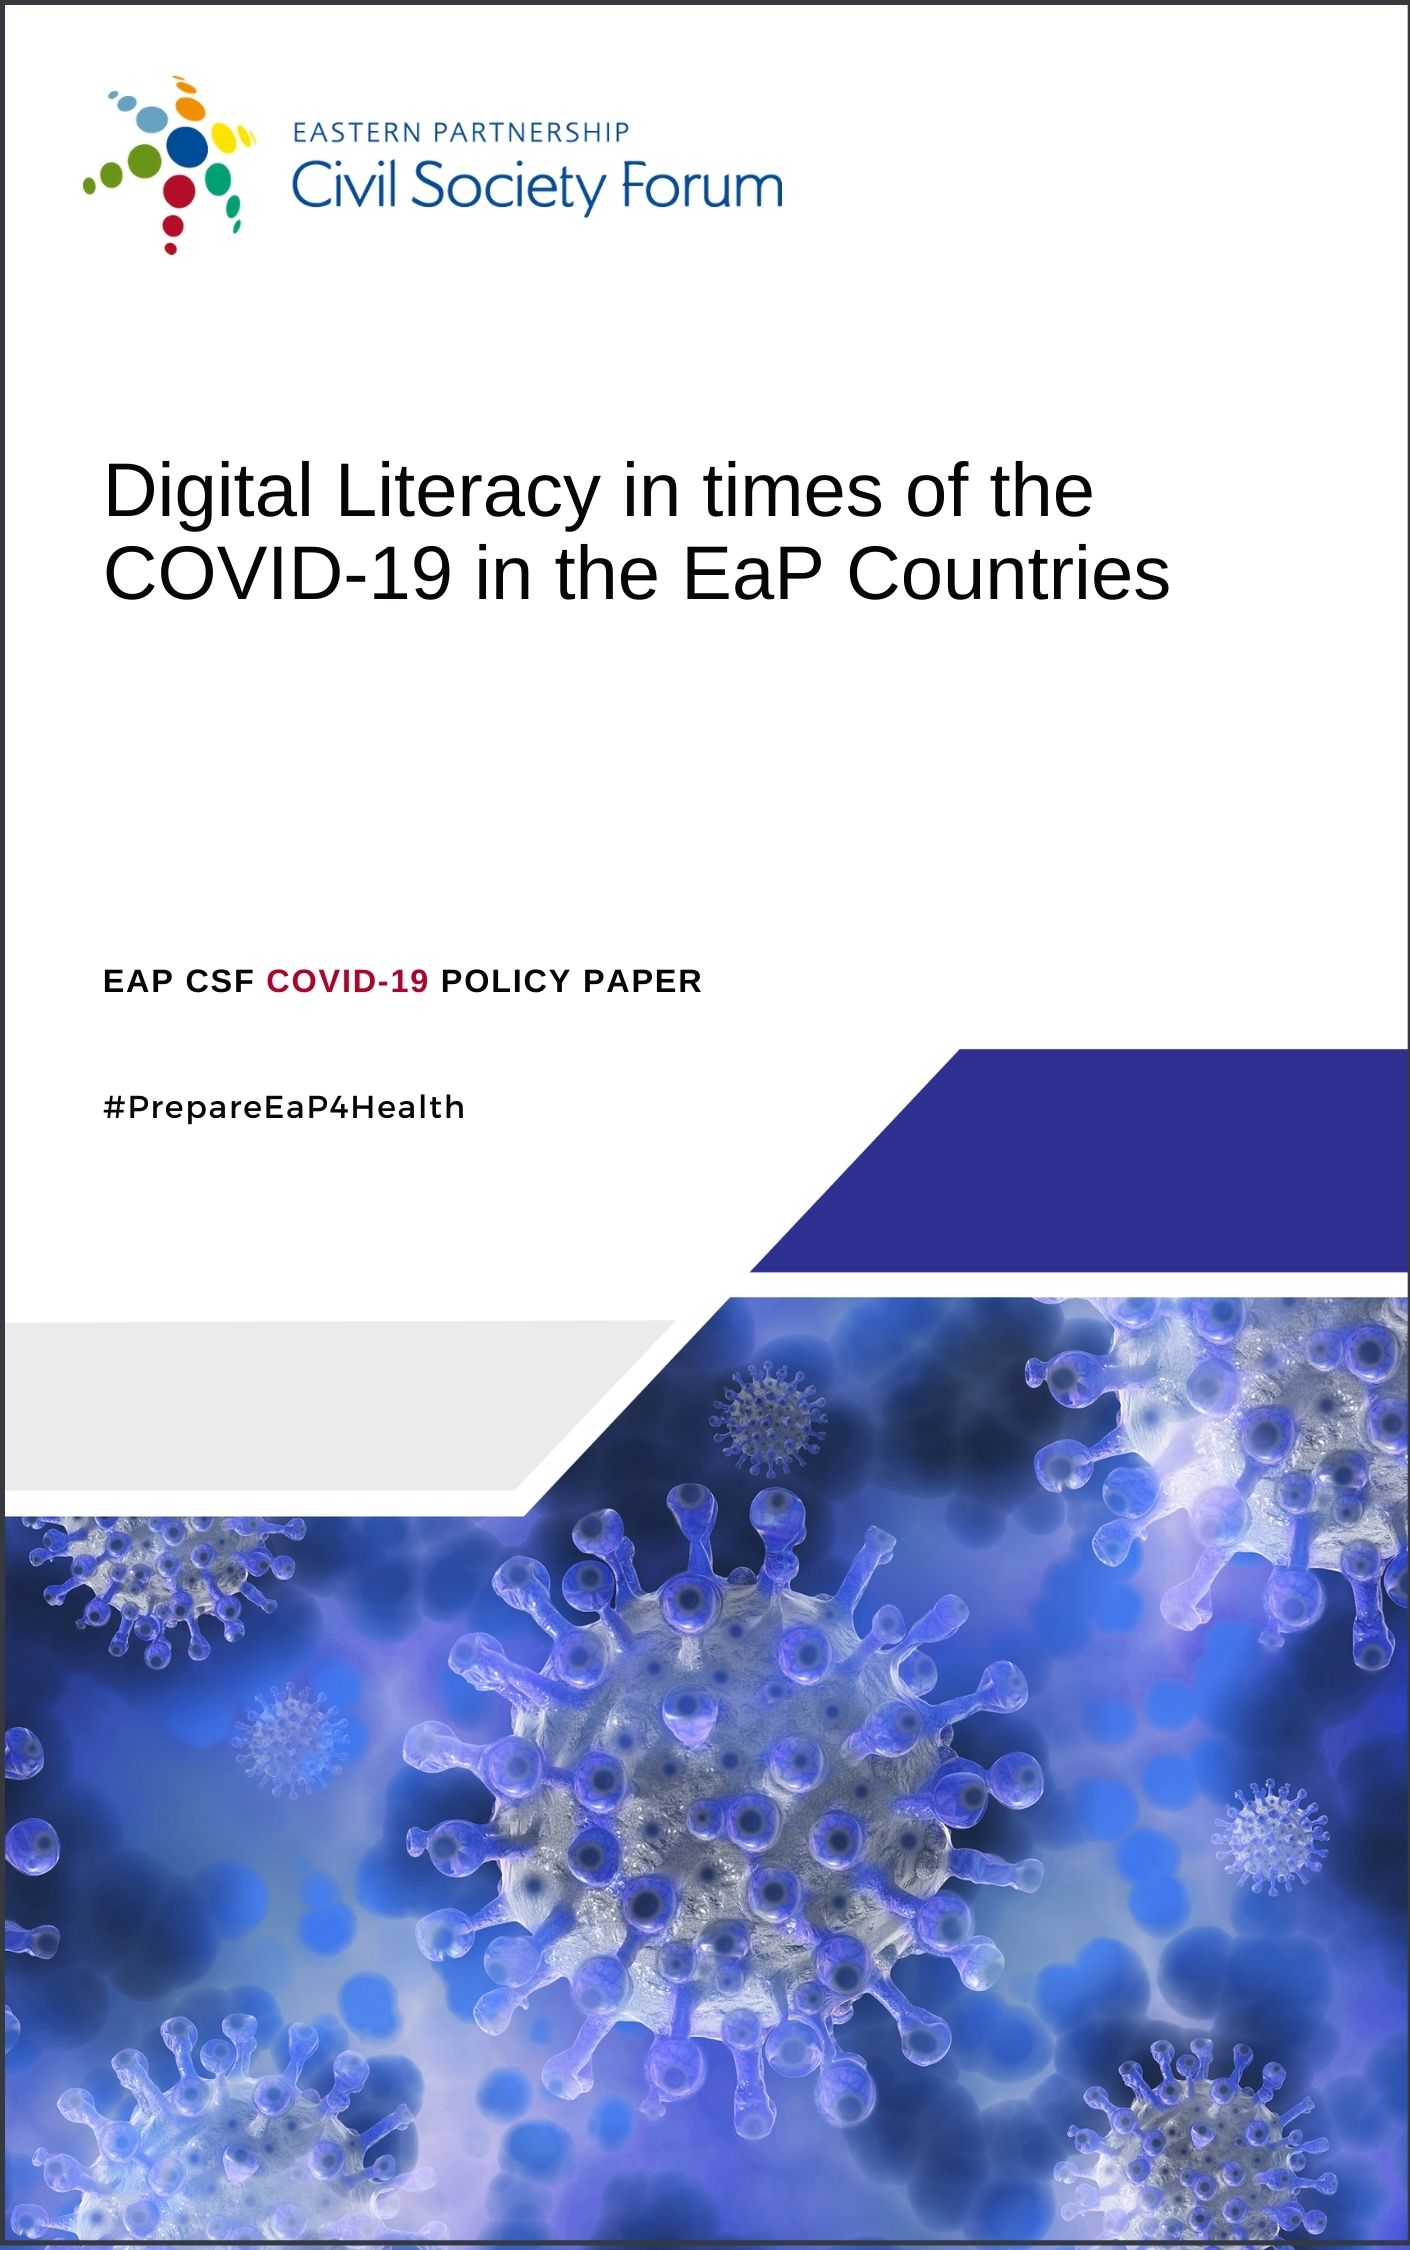 Digital literacy in times of the COVID-19 in the EaP countries